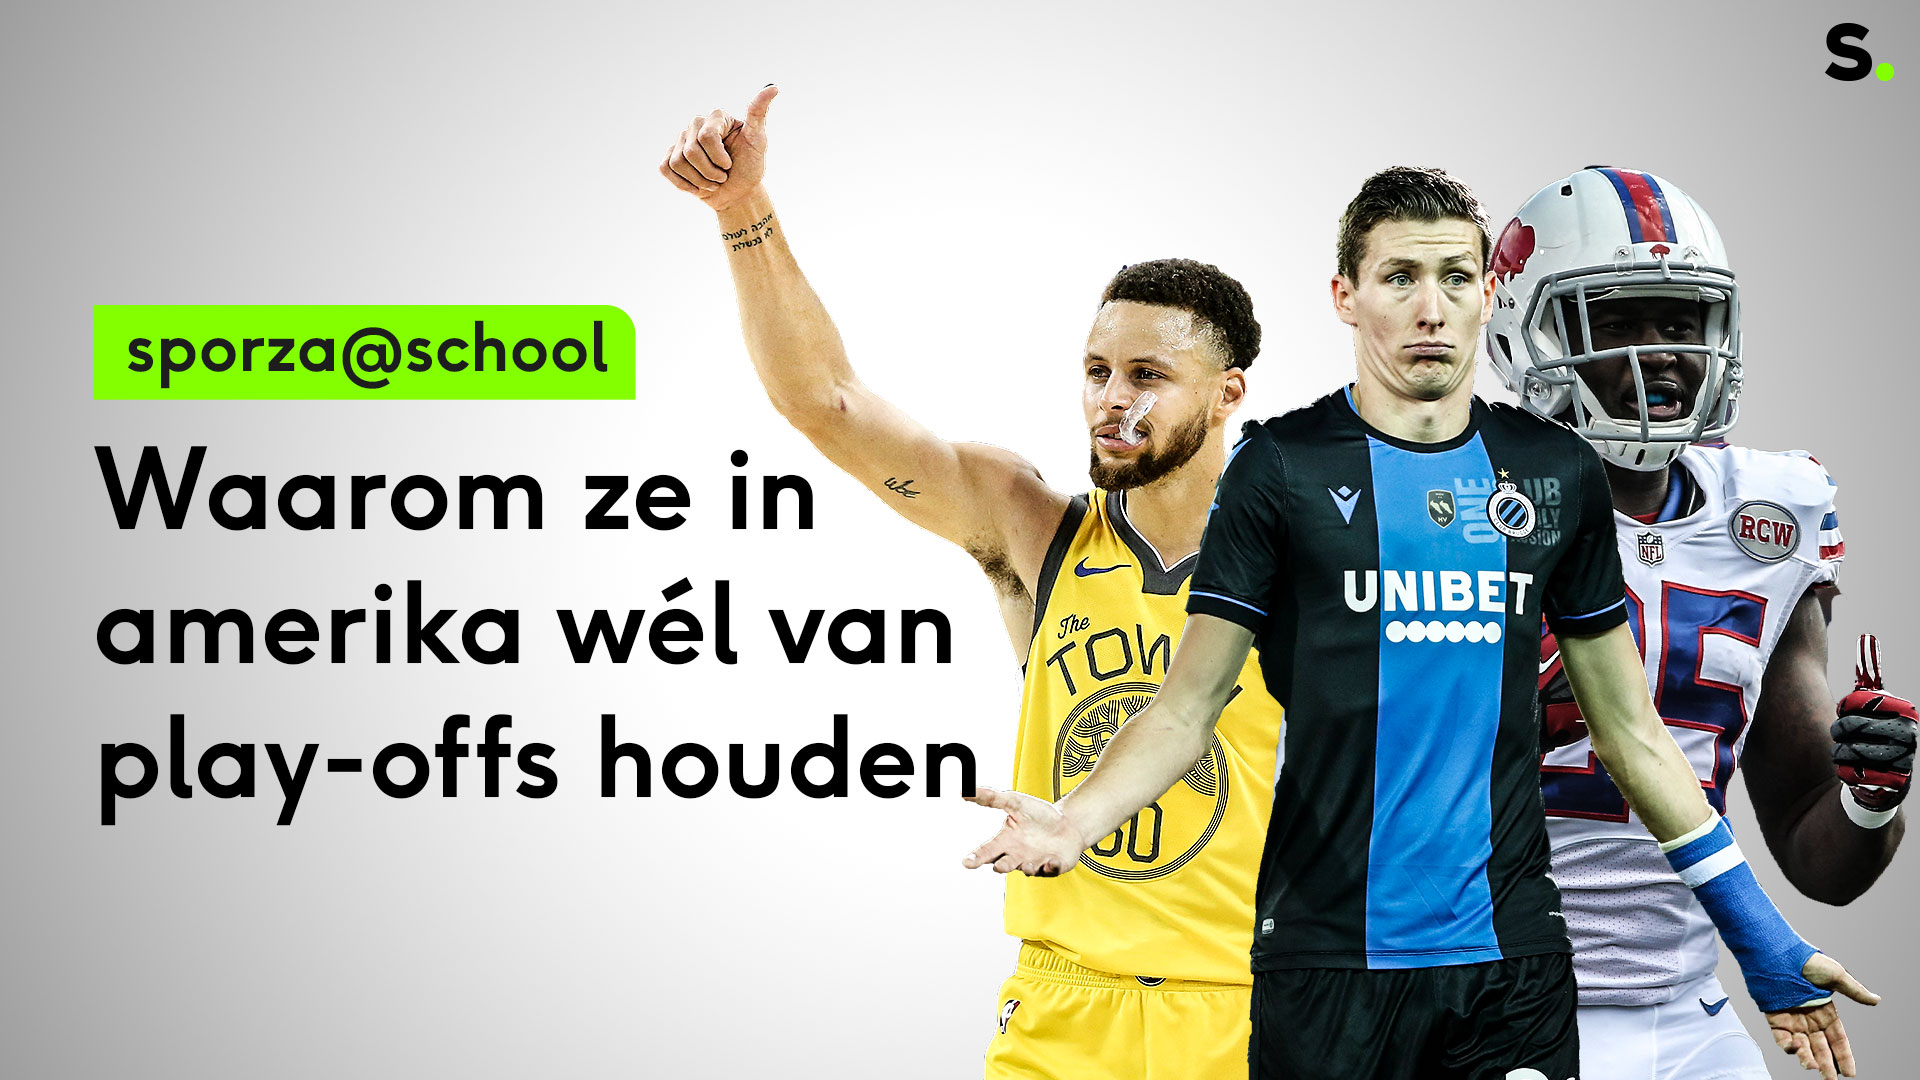 Sporza @ School # 29: Why are they exciting in the US to play playoffs?  |  Sporza school_school